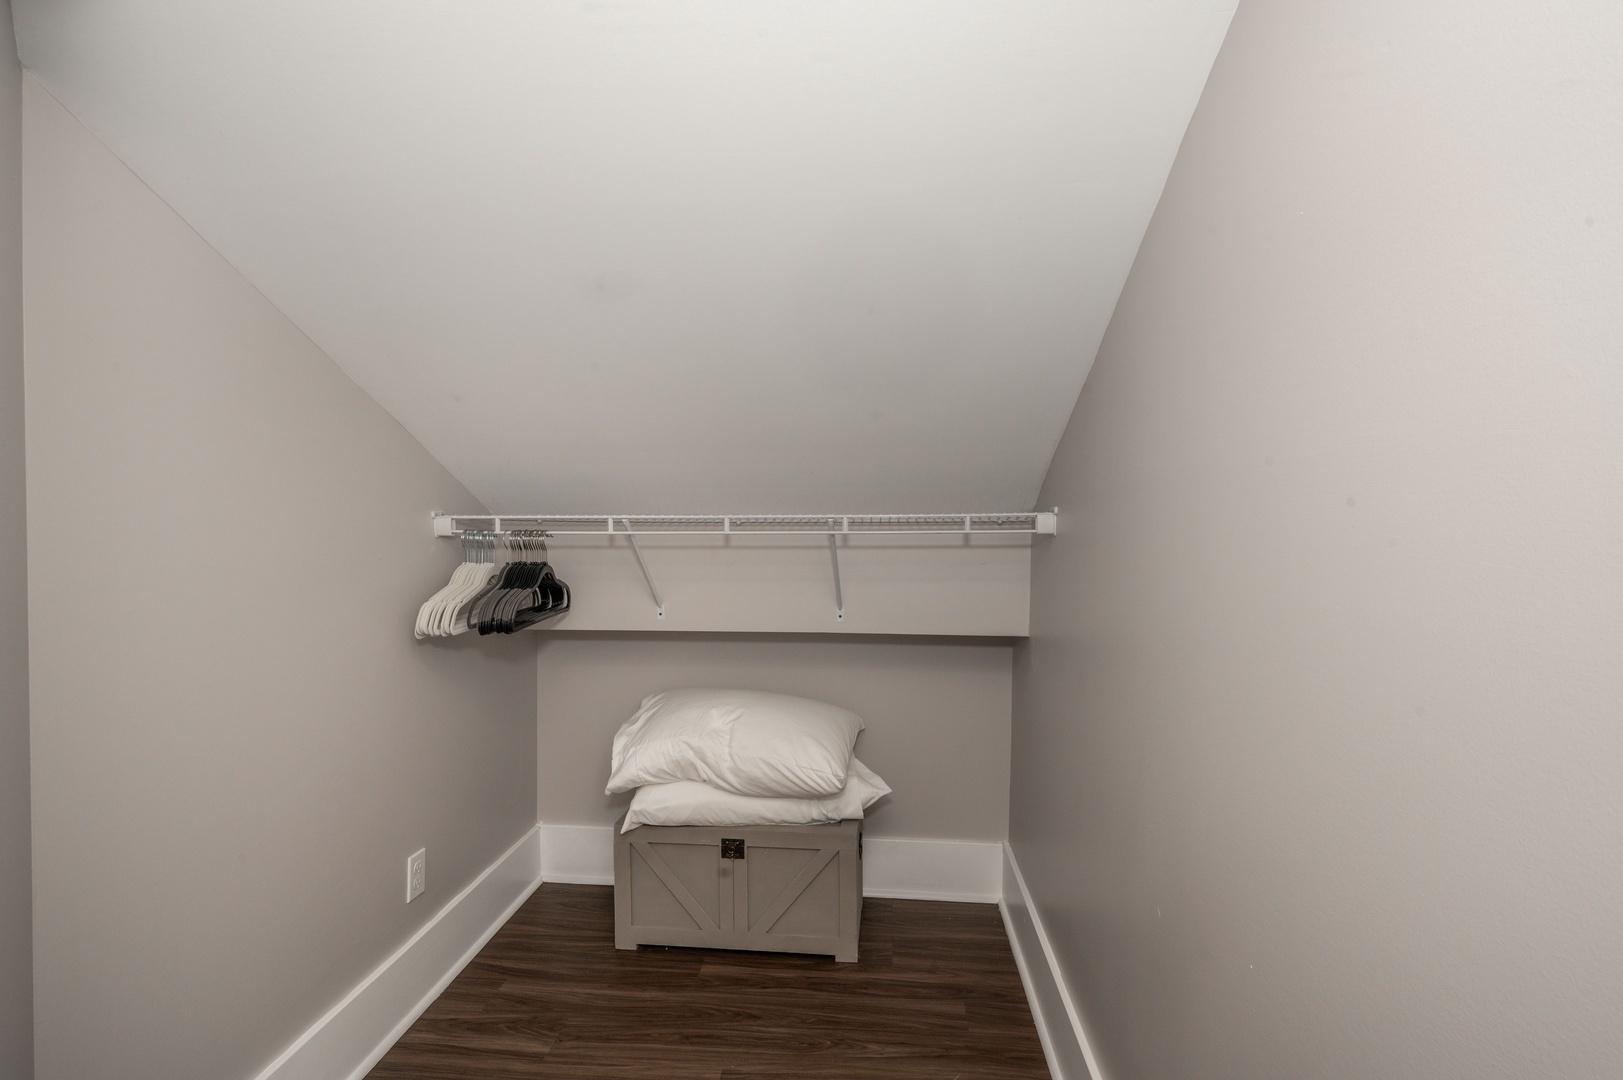 Apt 4 – Keep clothes & bags tucked away in the bedroom closet